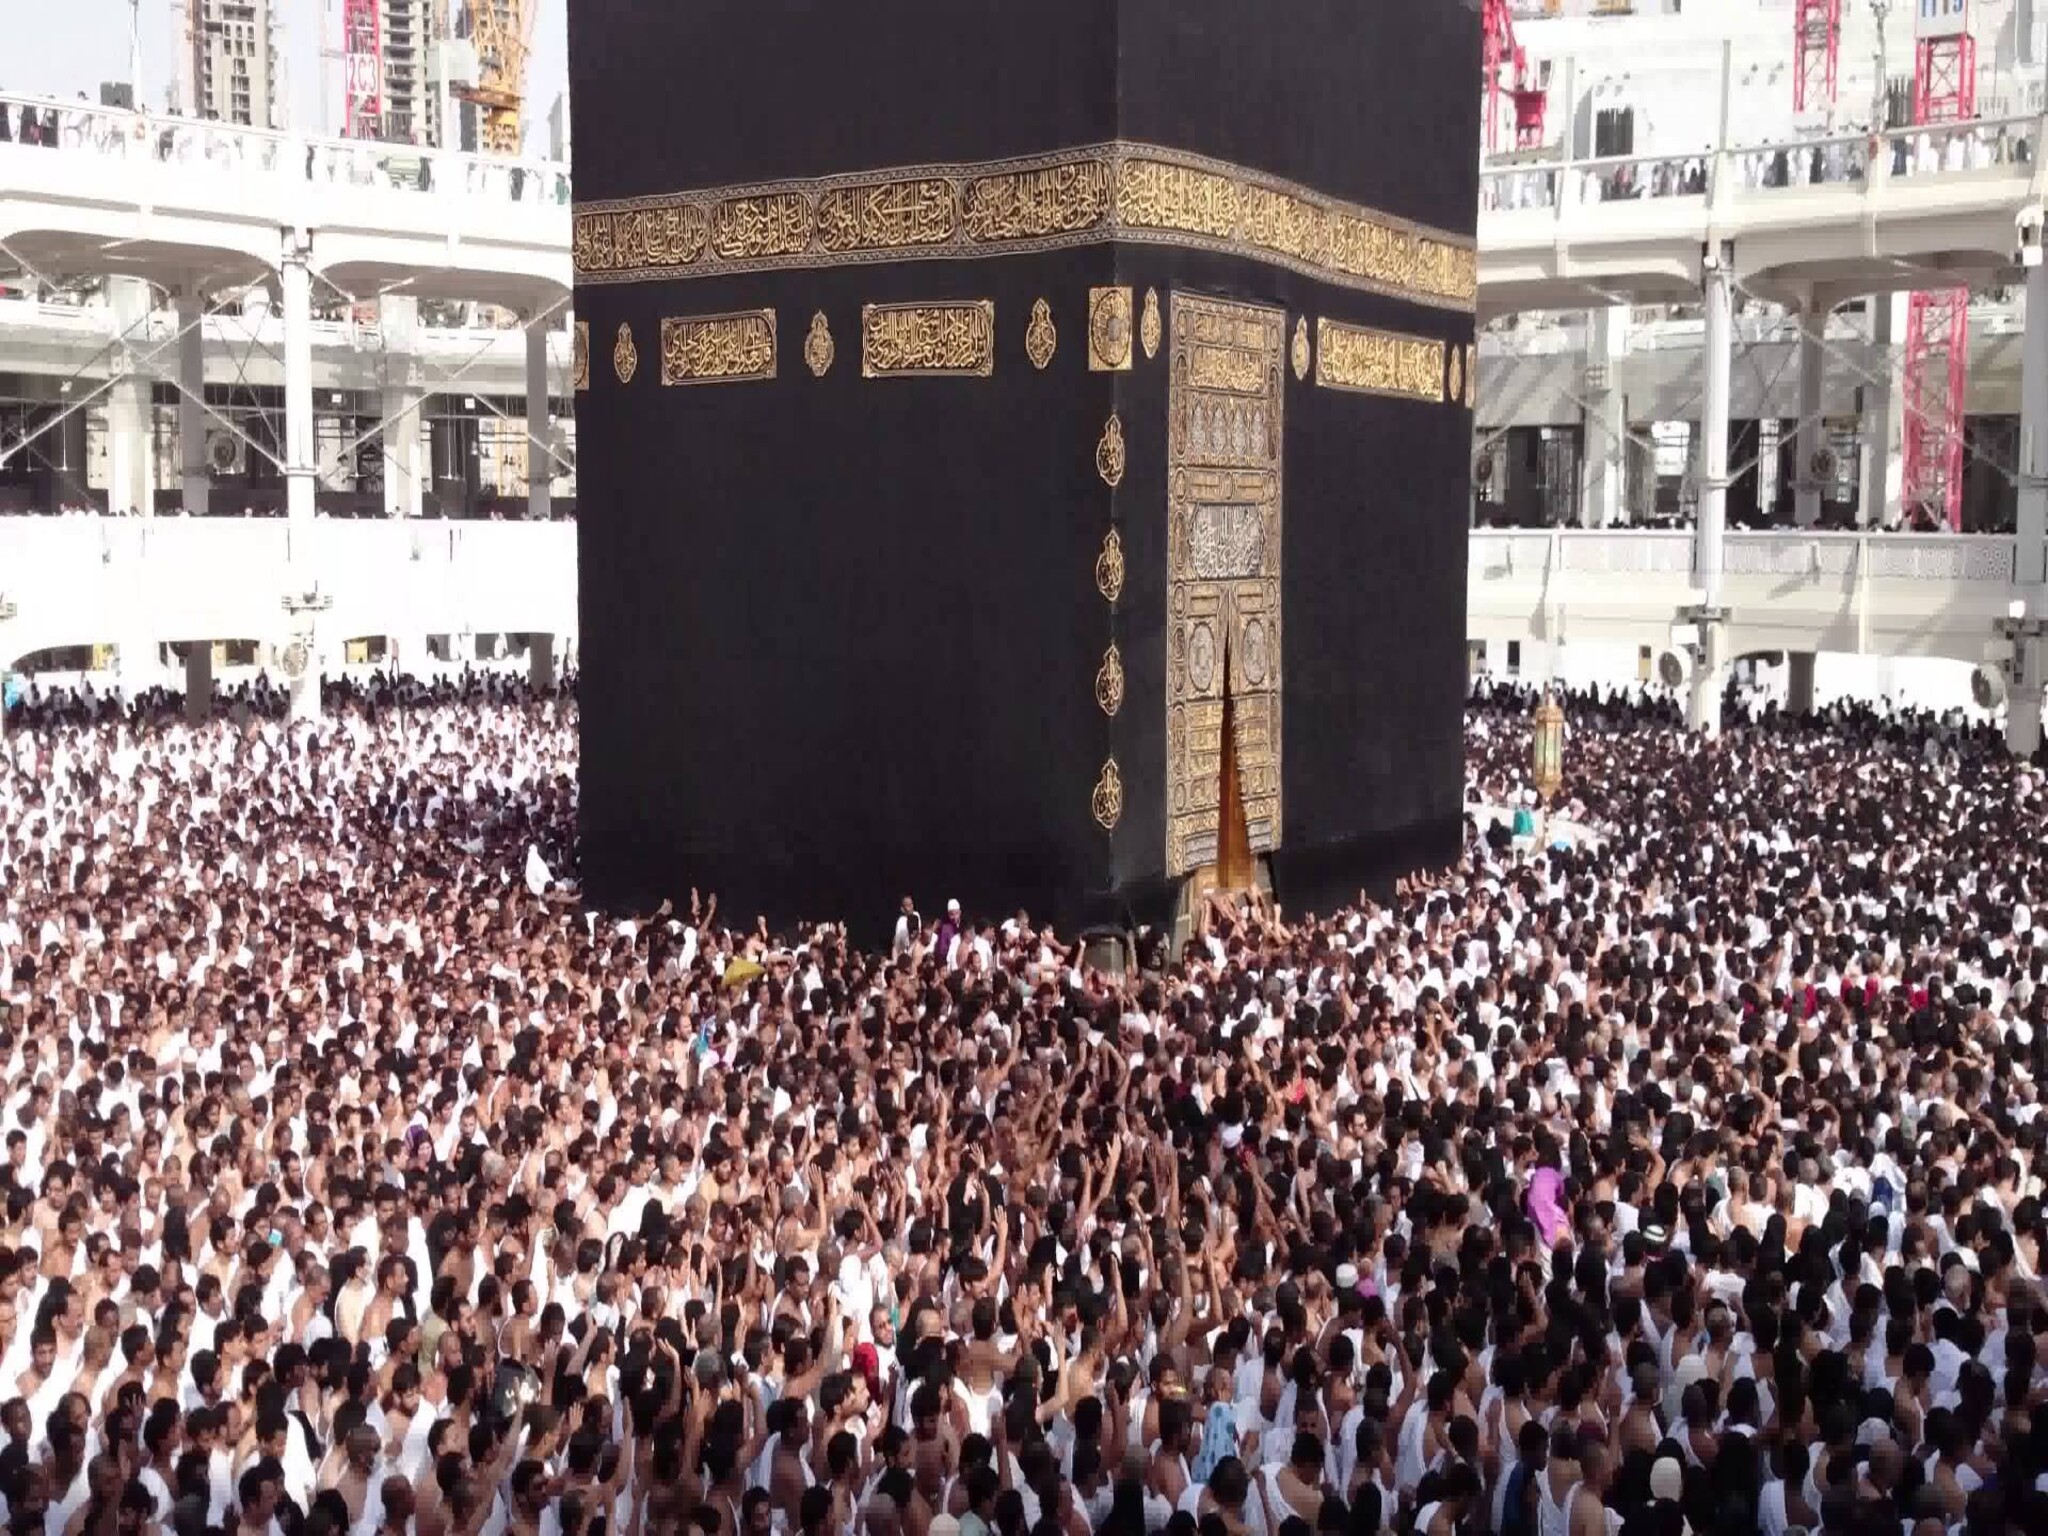 Hajj package prices from inside Saudi Arabia 1445 and how to register